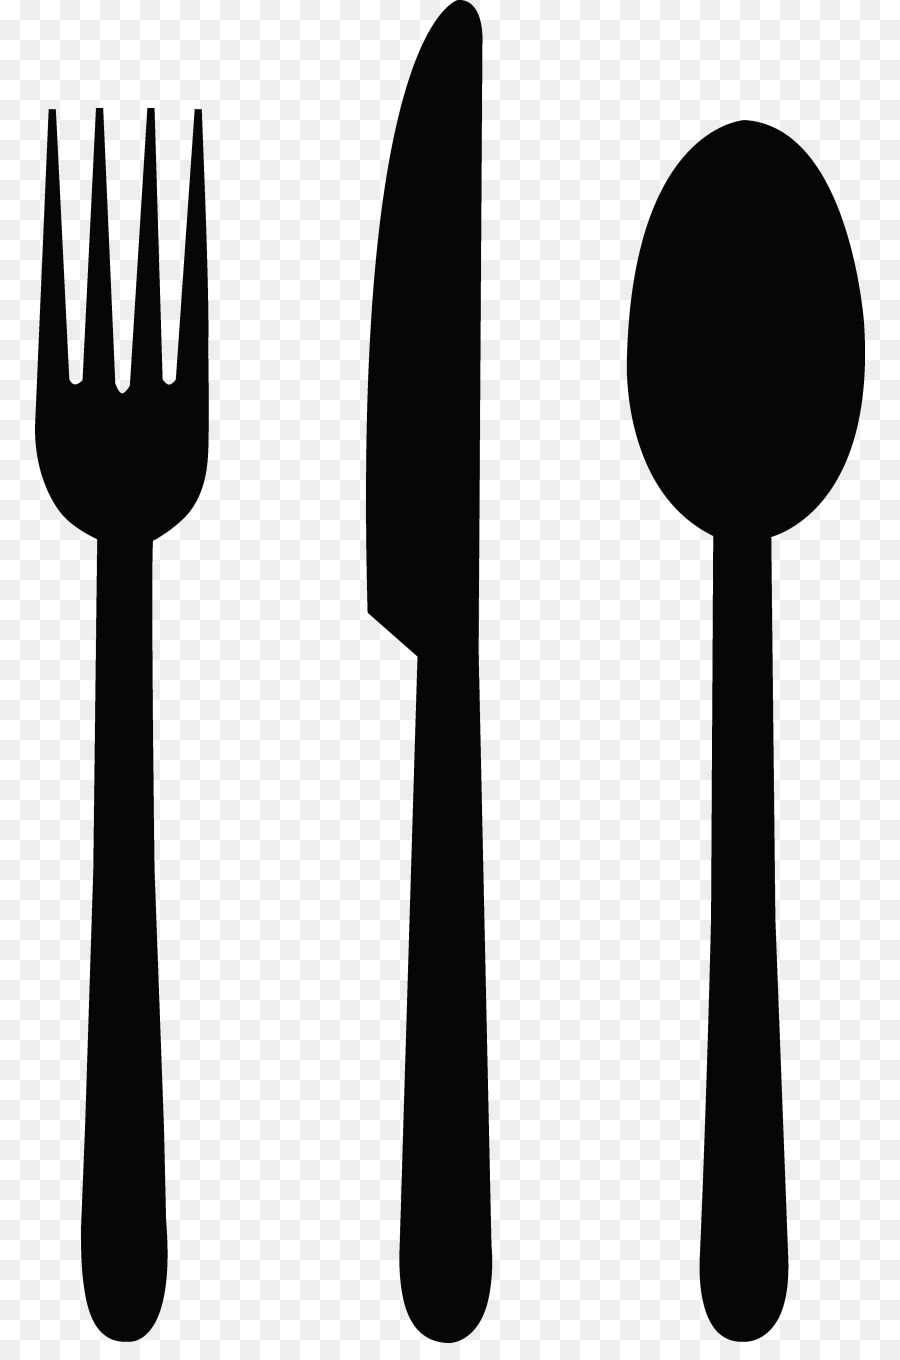 Knife Fork Spoon Cutlery Clip art - spoon and fork png download - 830*1343 - Free Transparent Knife png Download.